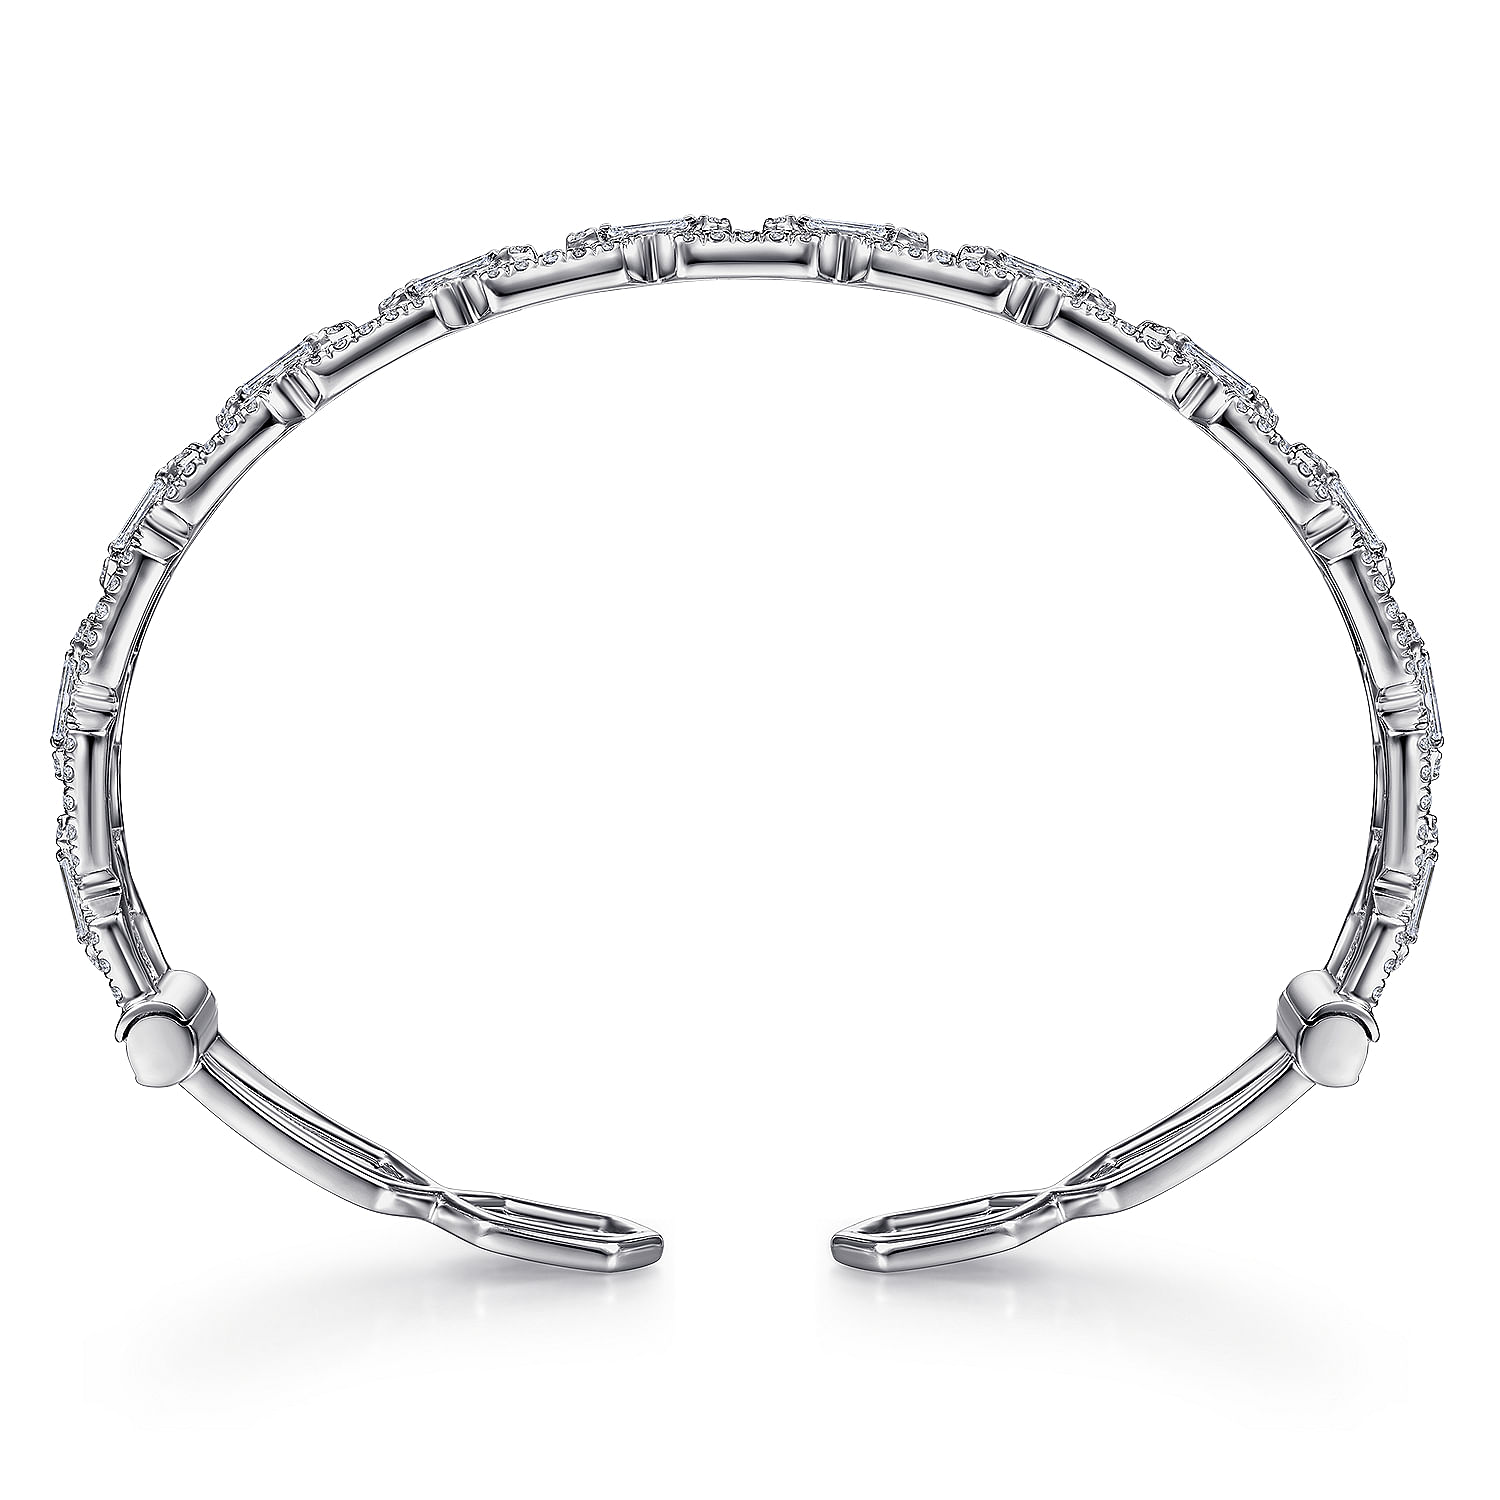 14K White Gold Diamond Chain Link Cuff Bracelet with Diamond Baguette Spacers